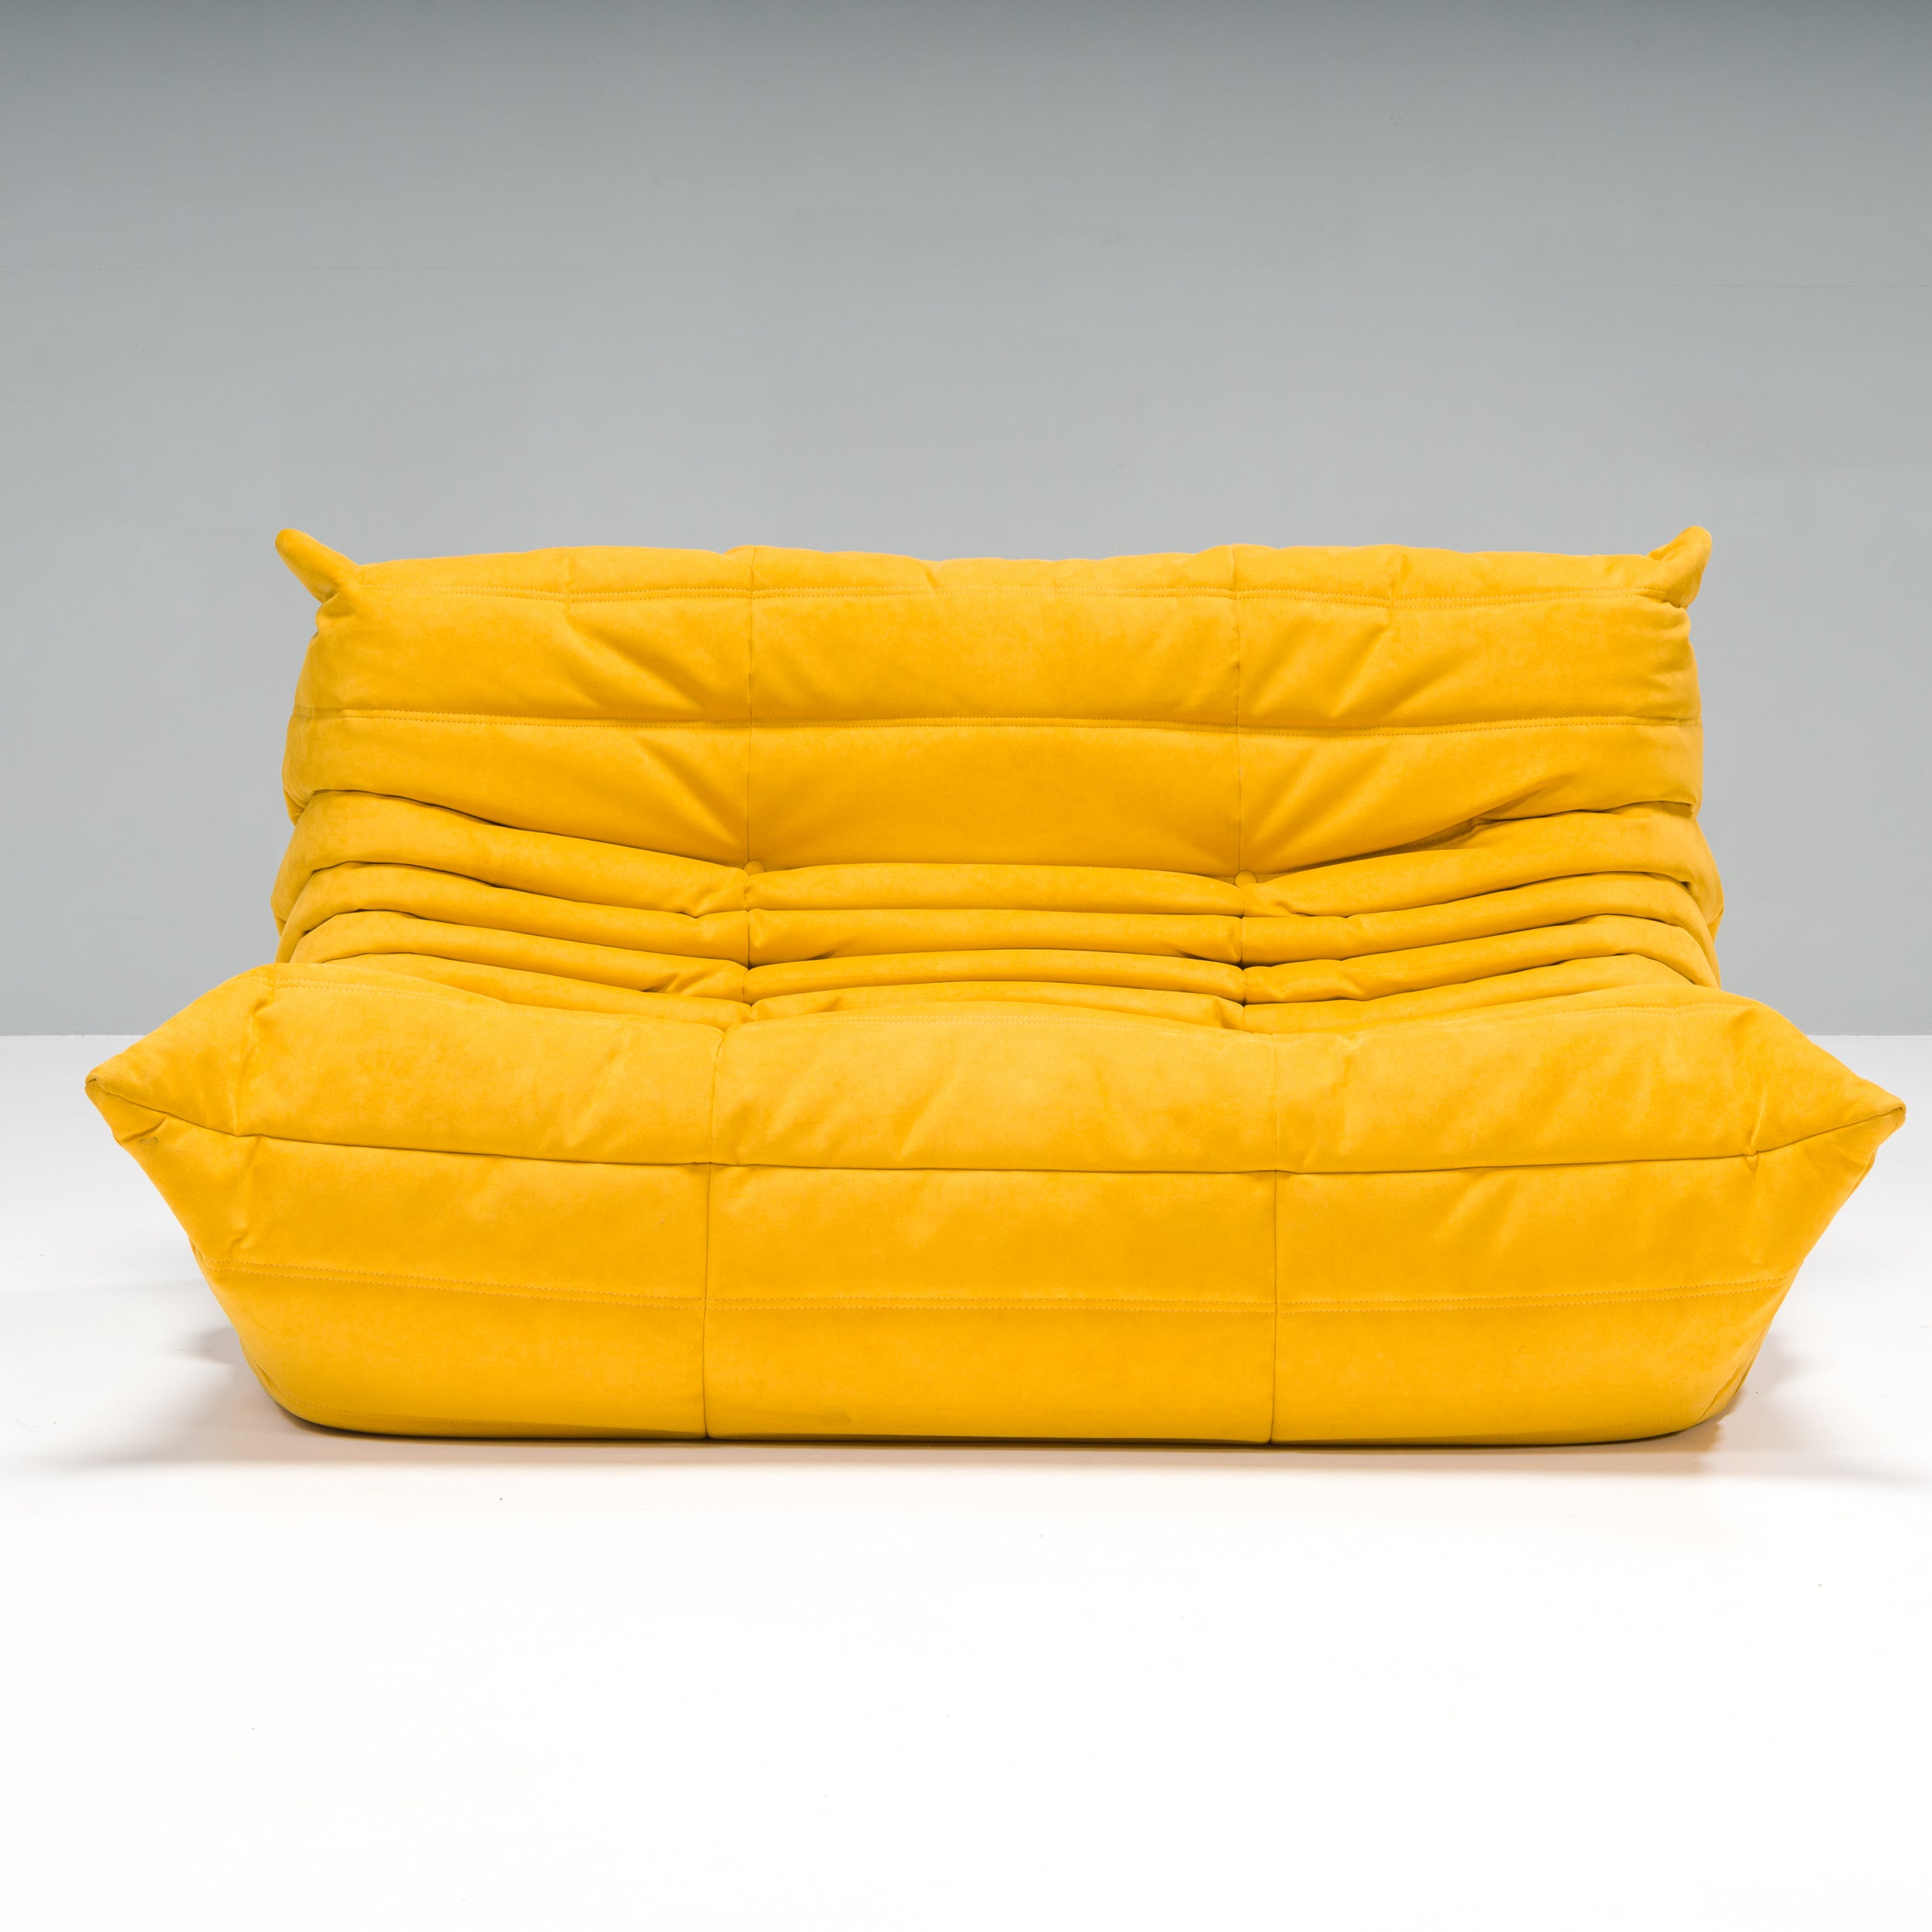 The iconic Togo sofa, originally designed by Michel Ducaroy for Ligne Roset in 1973, has become a design classic.

This sofa is incredibly versatile and can be used alone or paired with other pieces from the range. The piece features the instantly